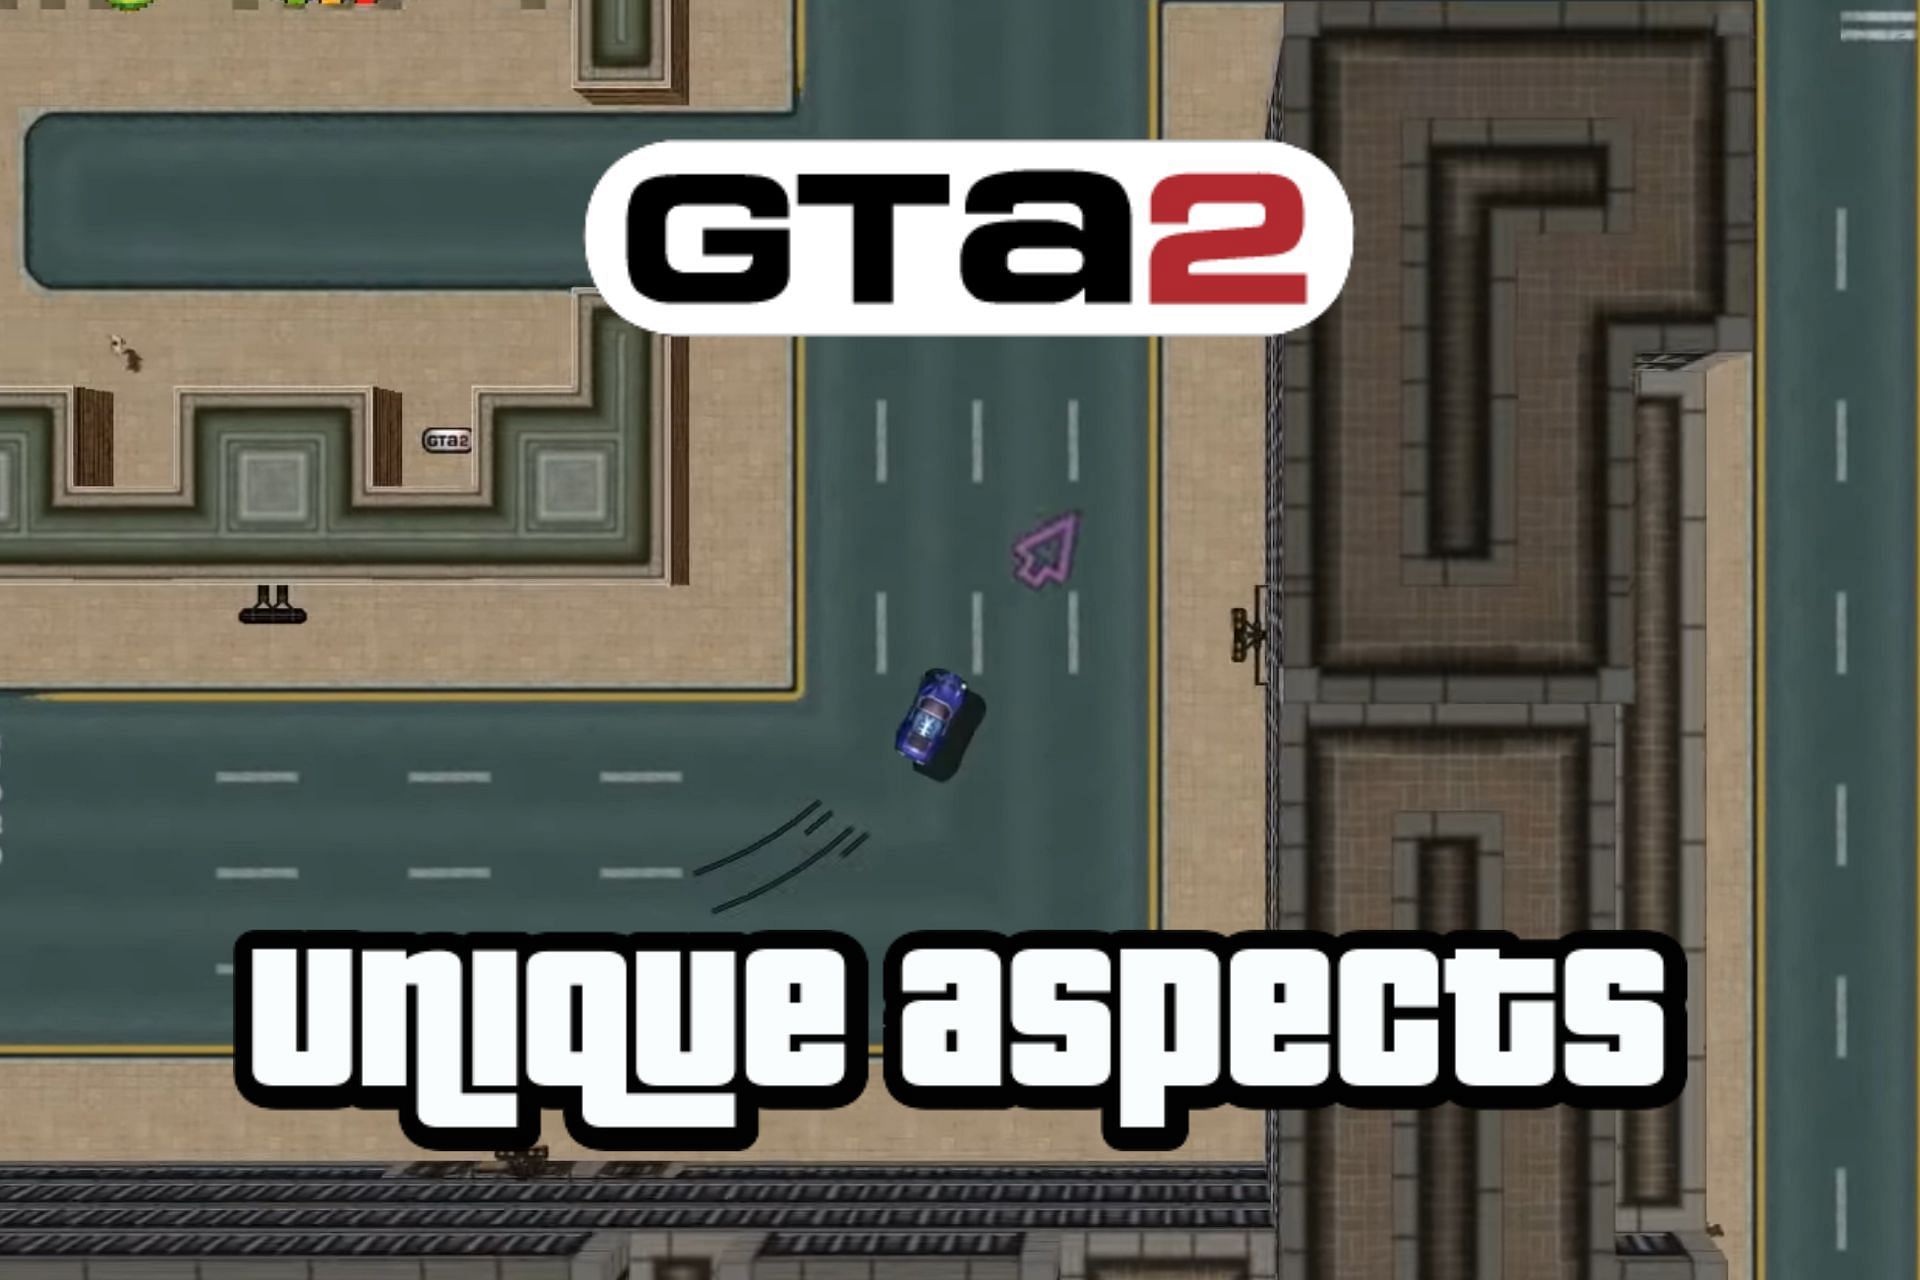 5 Things About Gta 2 That Makes It Different From The Rest